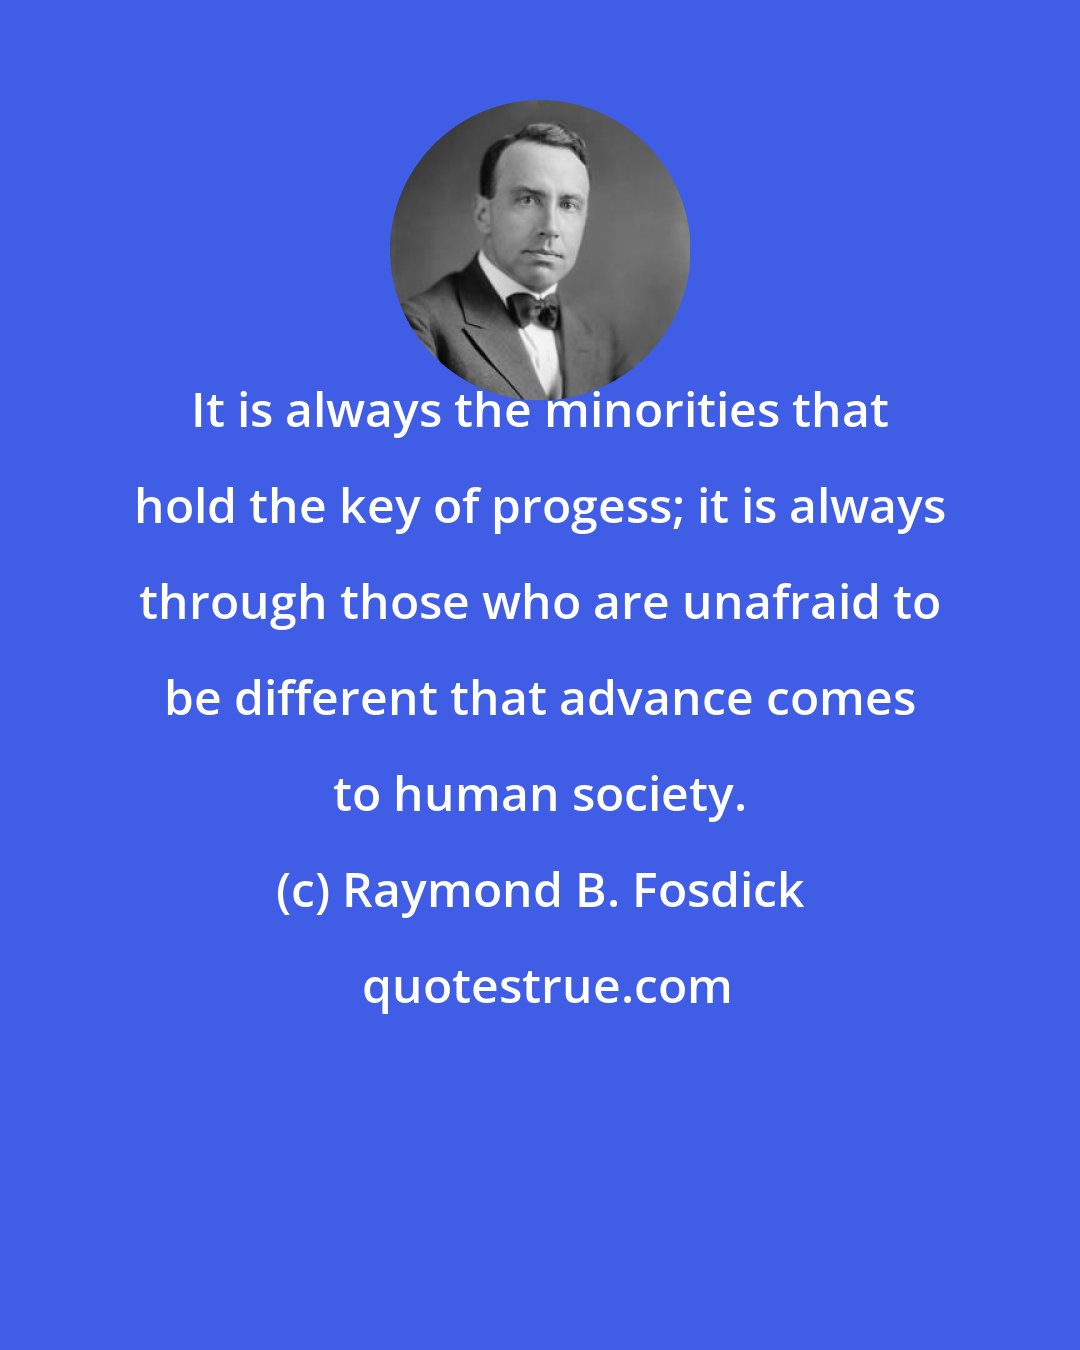 Raymond B. Fosdick: It is always the minorities that hold the key of progess; it is always through those who are unafraid to be different that advance comes to human society.